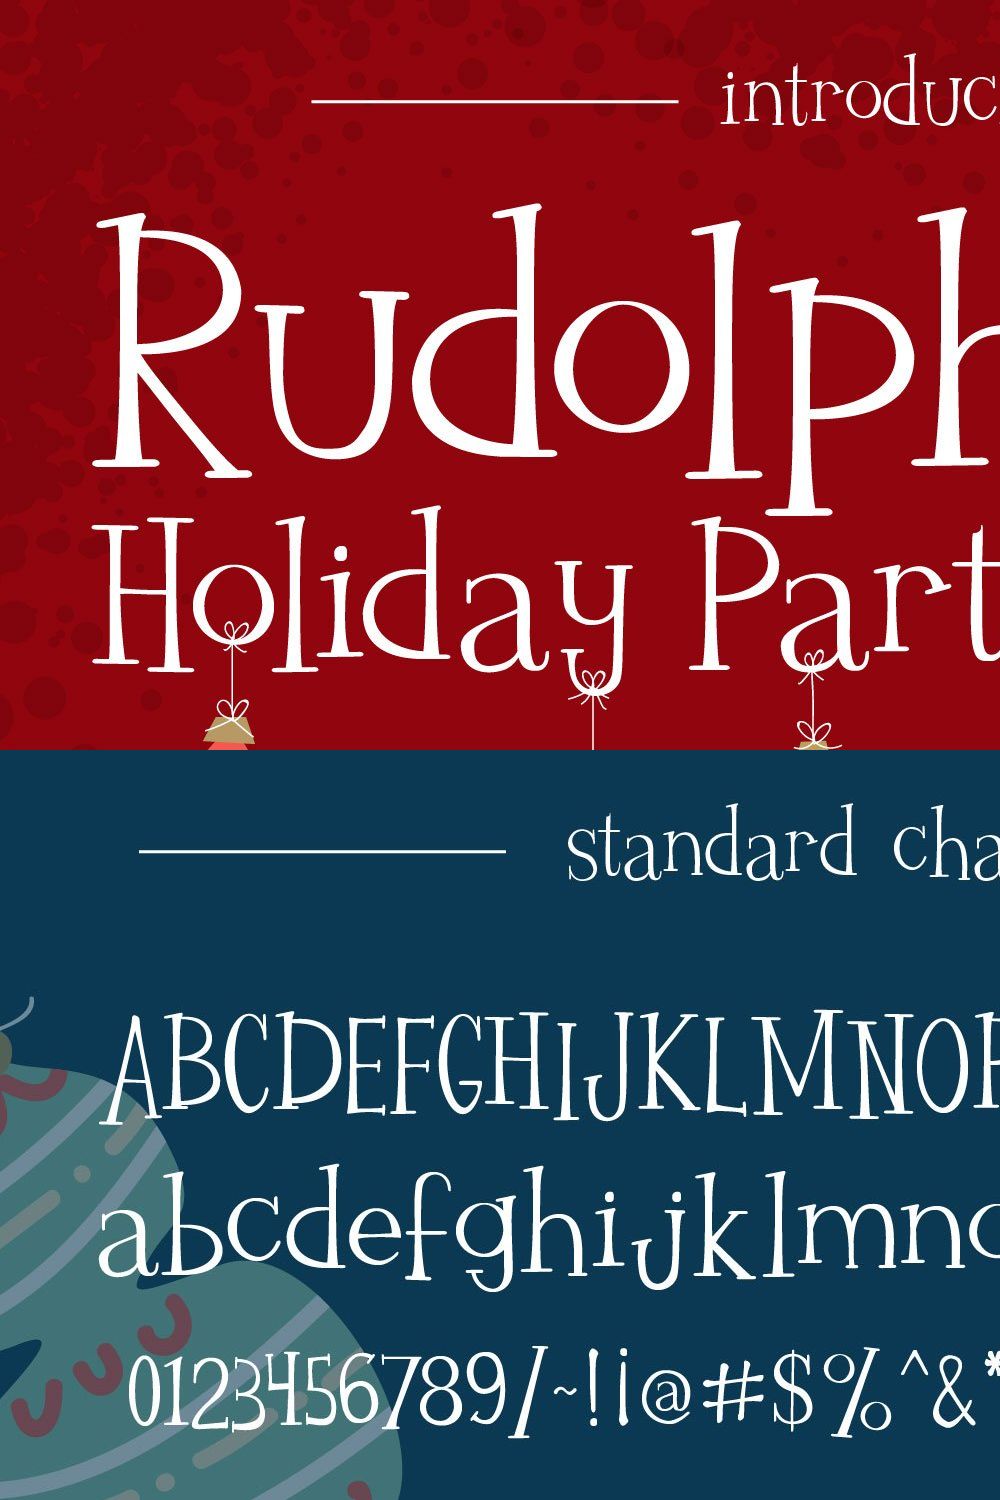 Rudolph's Holiday Party pinterest preview image.